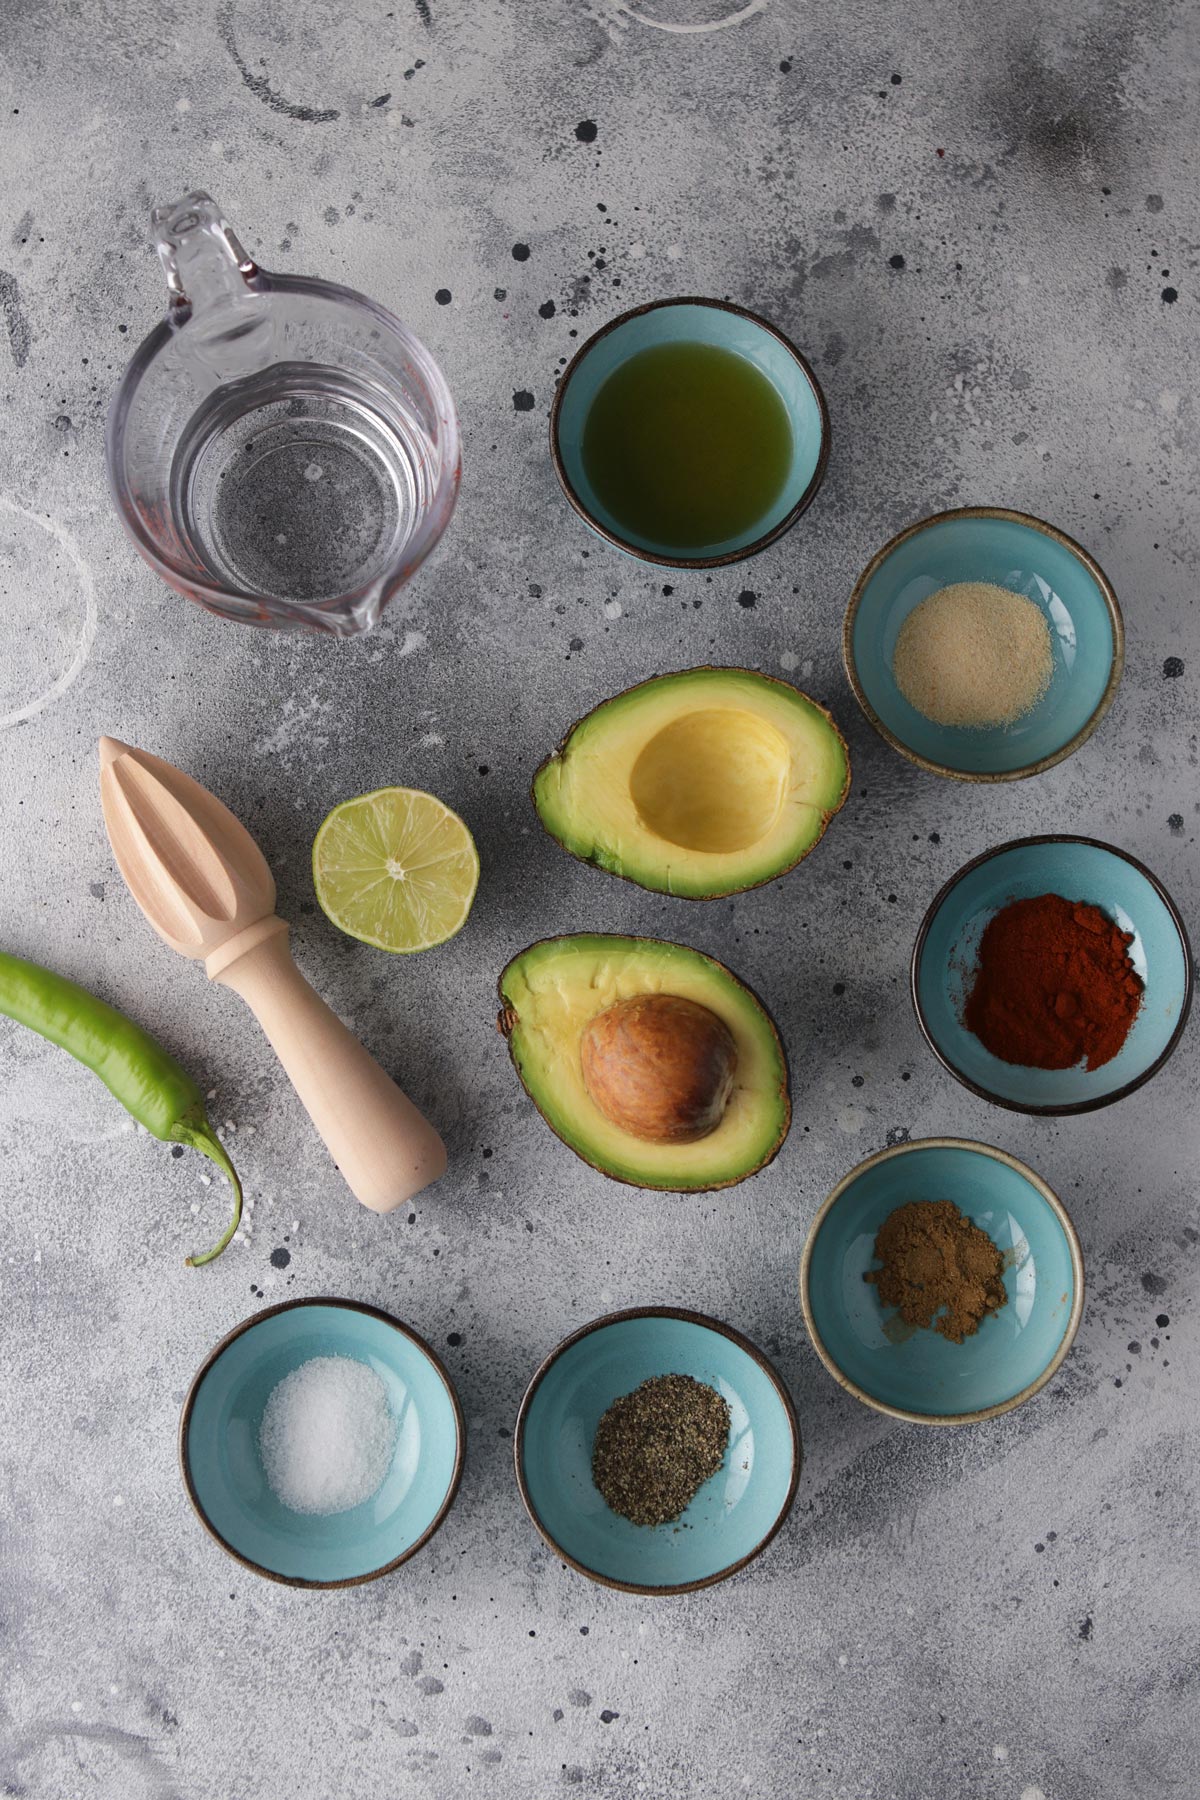 Ingredients for Avocado Dressing in Little Bowls